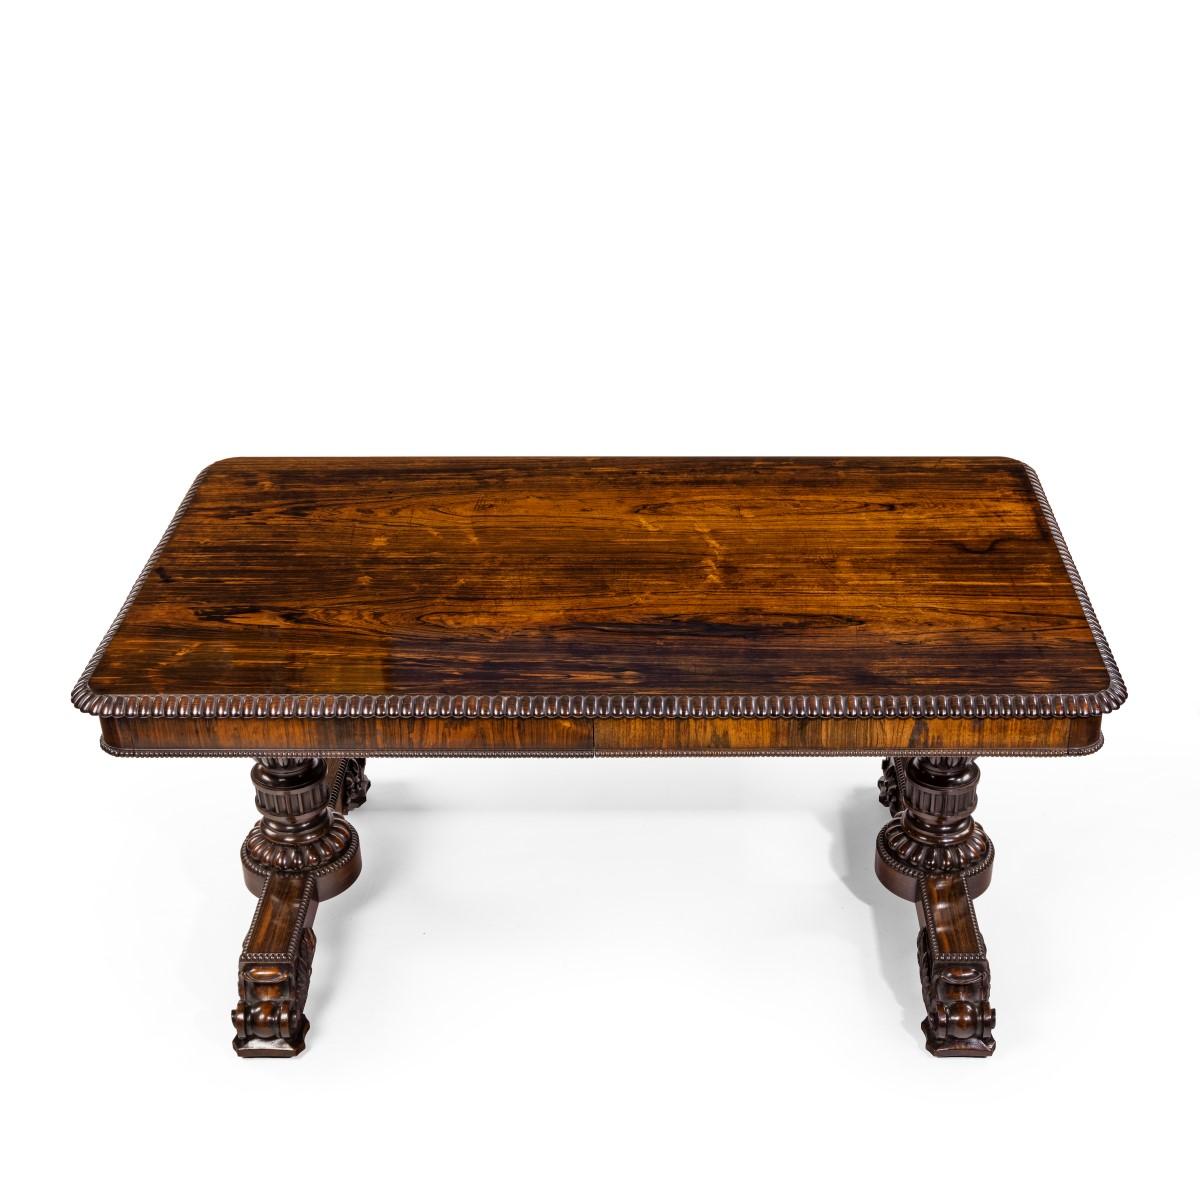 William iv Rosewood Partners’ Library Table by Gillows 2